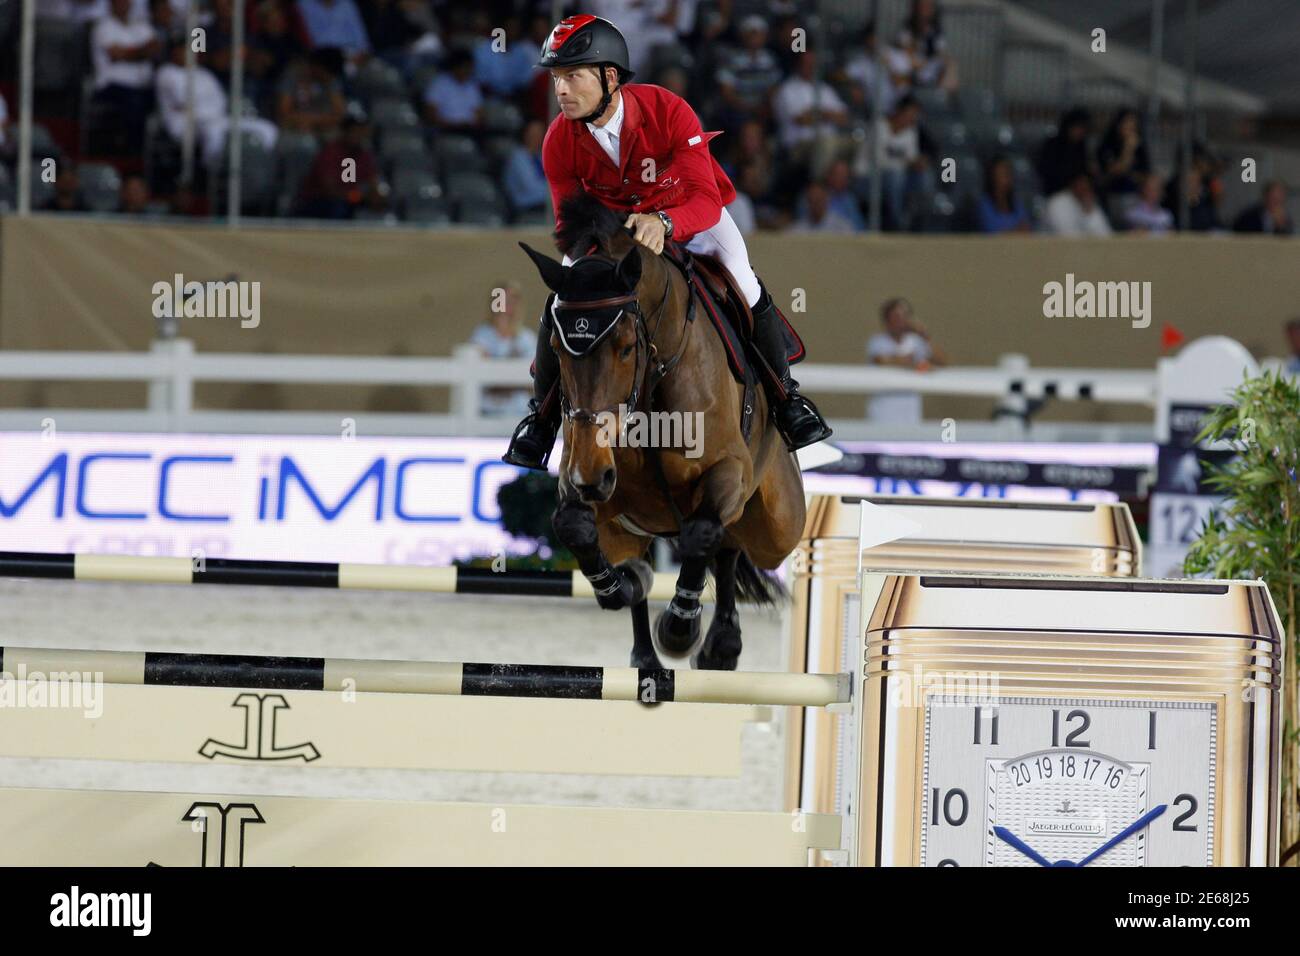 Switzerland?s Pius Schwizer clears a jump on his horse Carlina during the Global  Champions Tour in Abu Dhabi November 24, 2011. Picture taken November 24,  2011. REUTERS/Martin Dokoupil (UNITED ARAB EMIRATES -